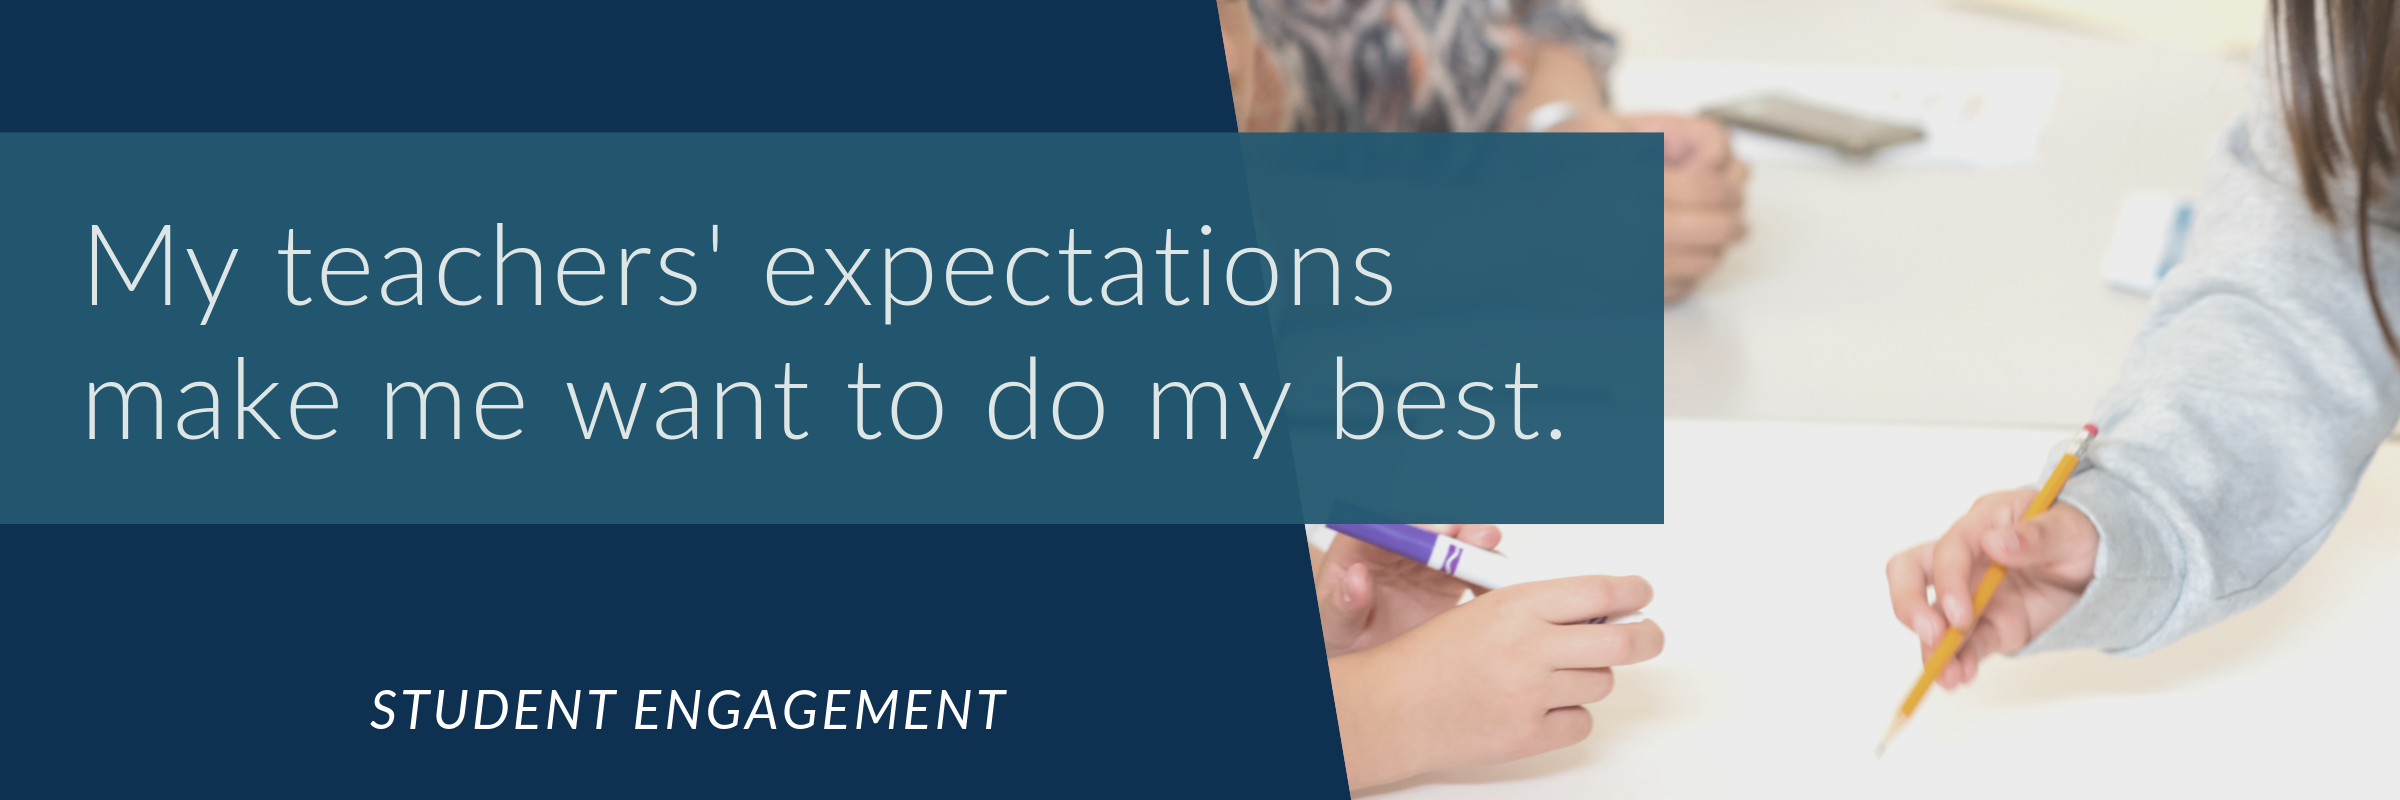 My teachers' expectations make me want to do my best.